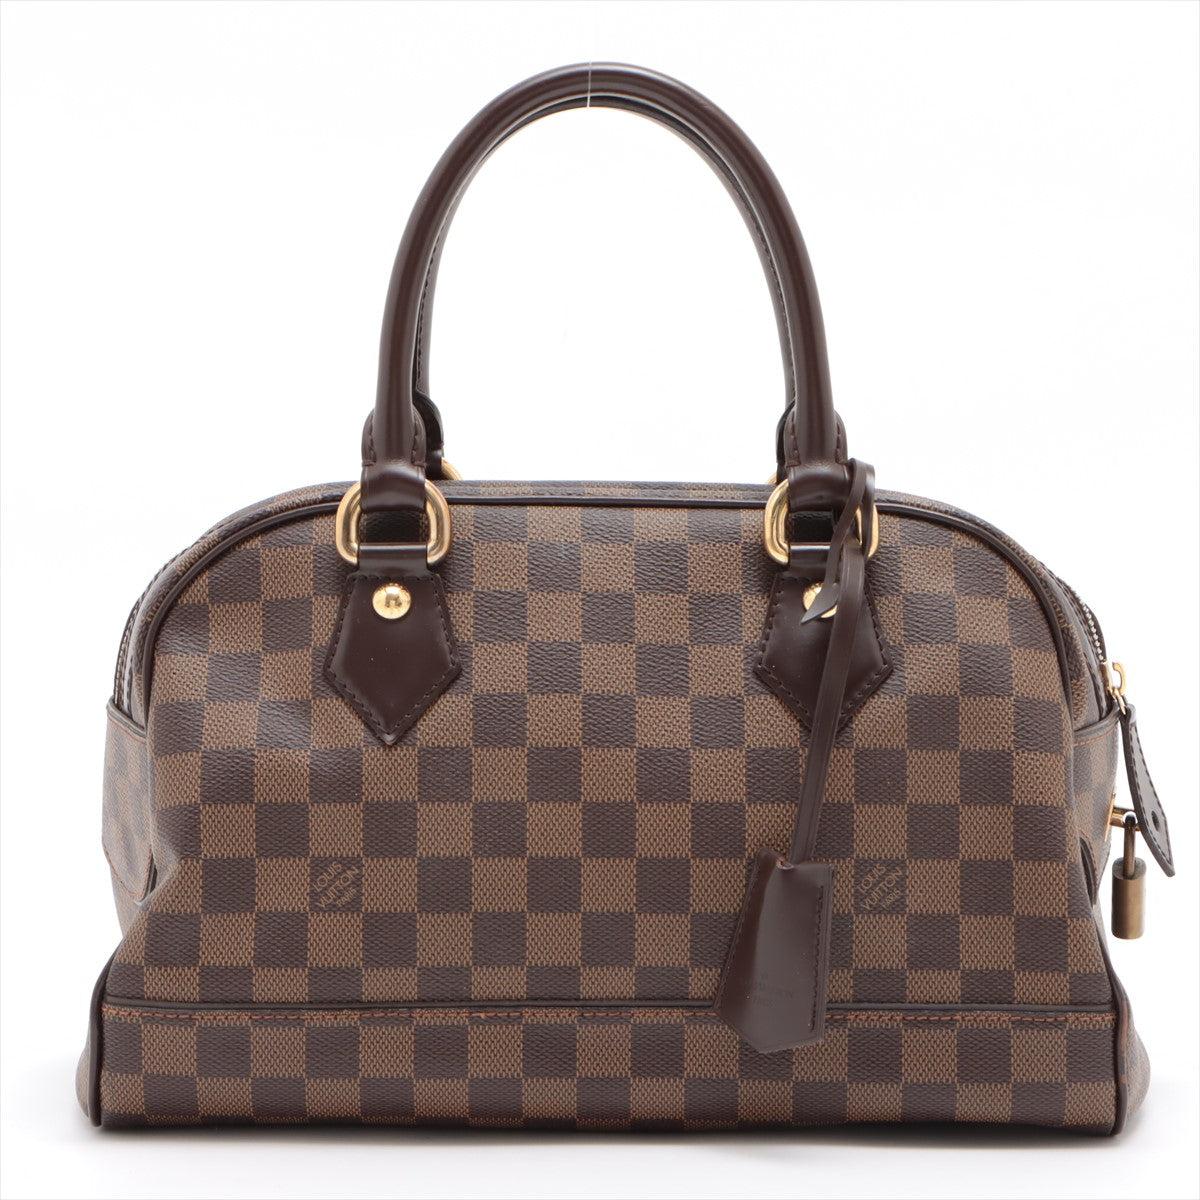 Brown Damier Ebene coated canvas Louis Vuitton Duomo hobo bag with gold-tone hardware, smooth dark brown leather trim, double rolled leather handles, red Alcantara canvas lining, one flat pocket and once cell phone pocket at interior walls and